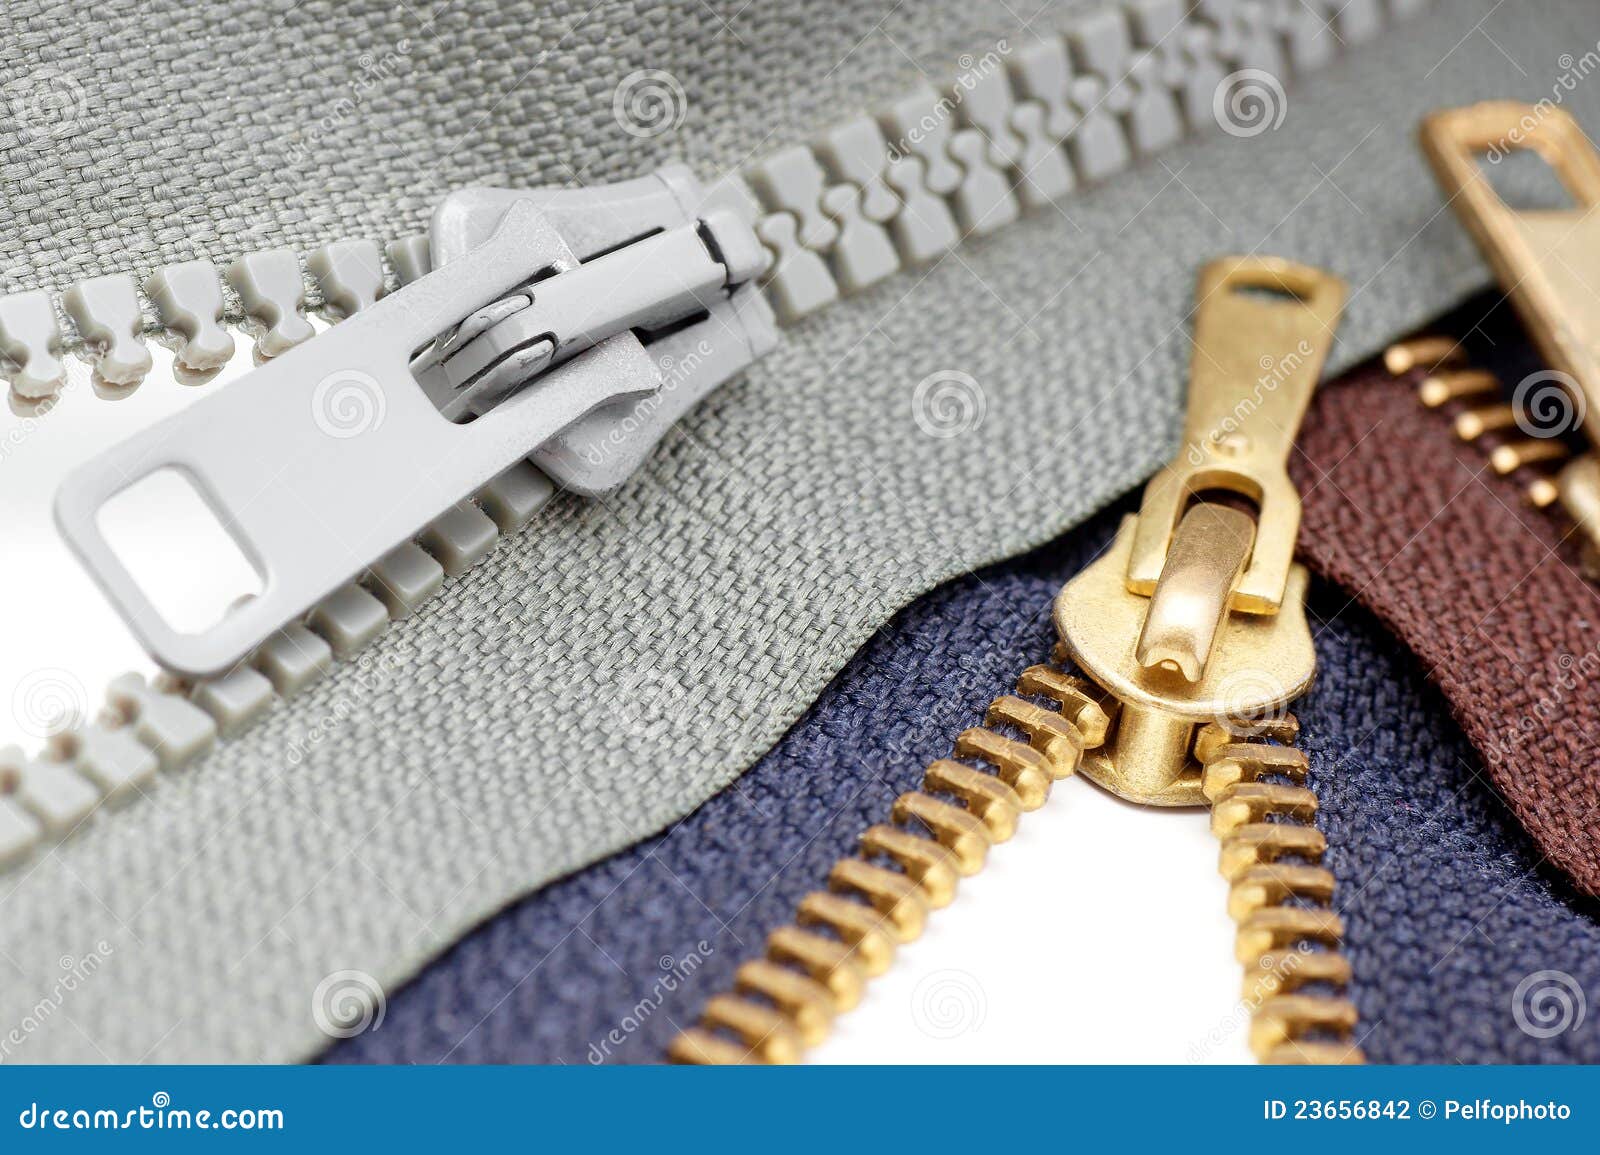 Zippers stock photo. Image of connection, insert, manufacture - 23656842